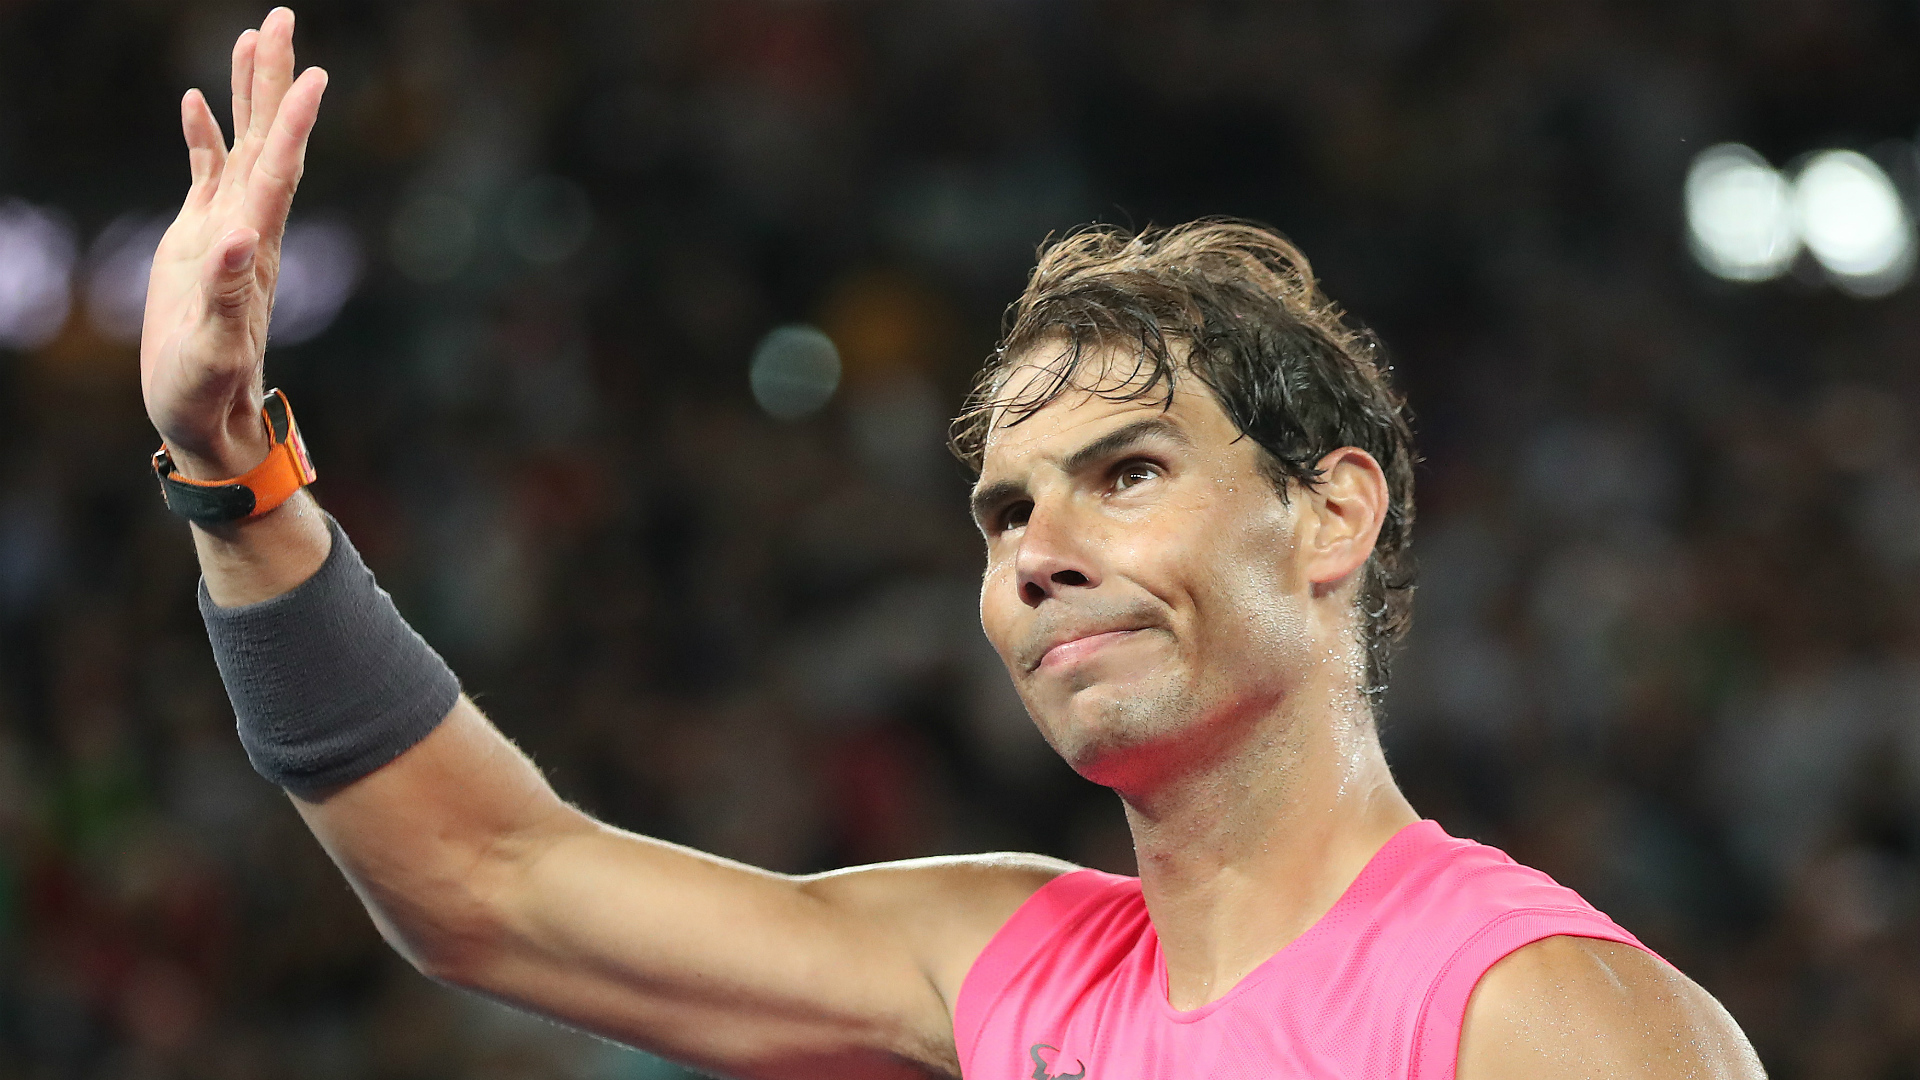 A quarter-final against Dominic Thiem was on Rafael Nadal's mind after he overcame a nervous fourth set to finish off Nick Kyrgios.